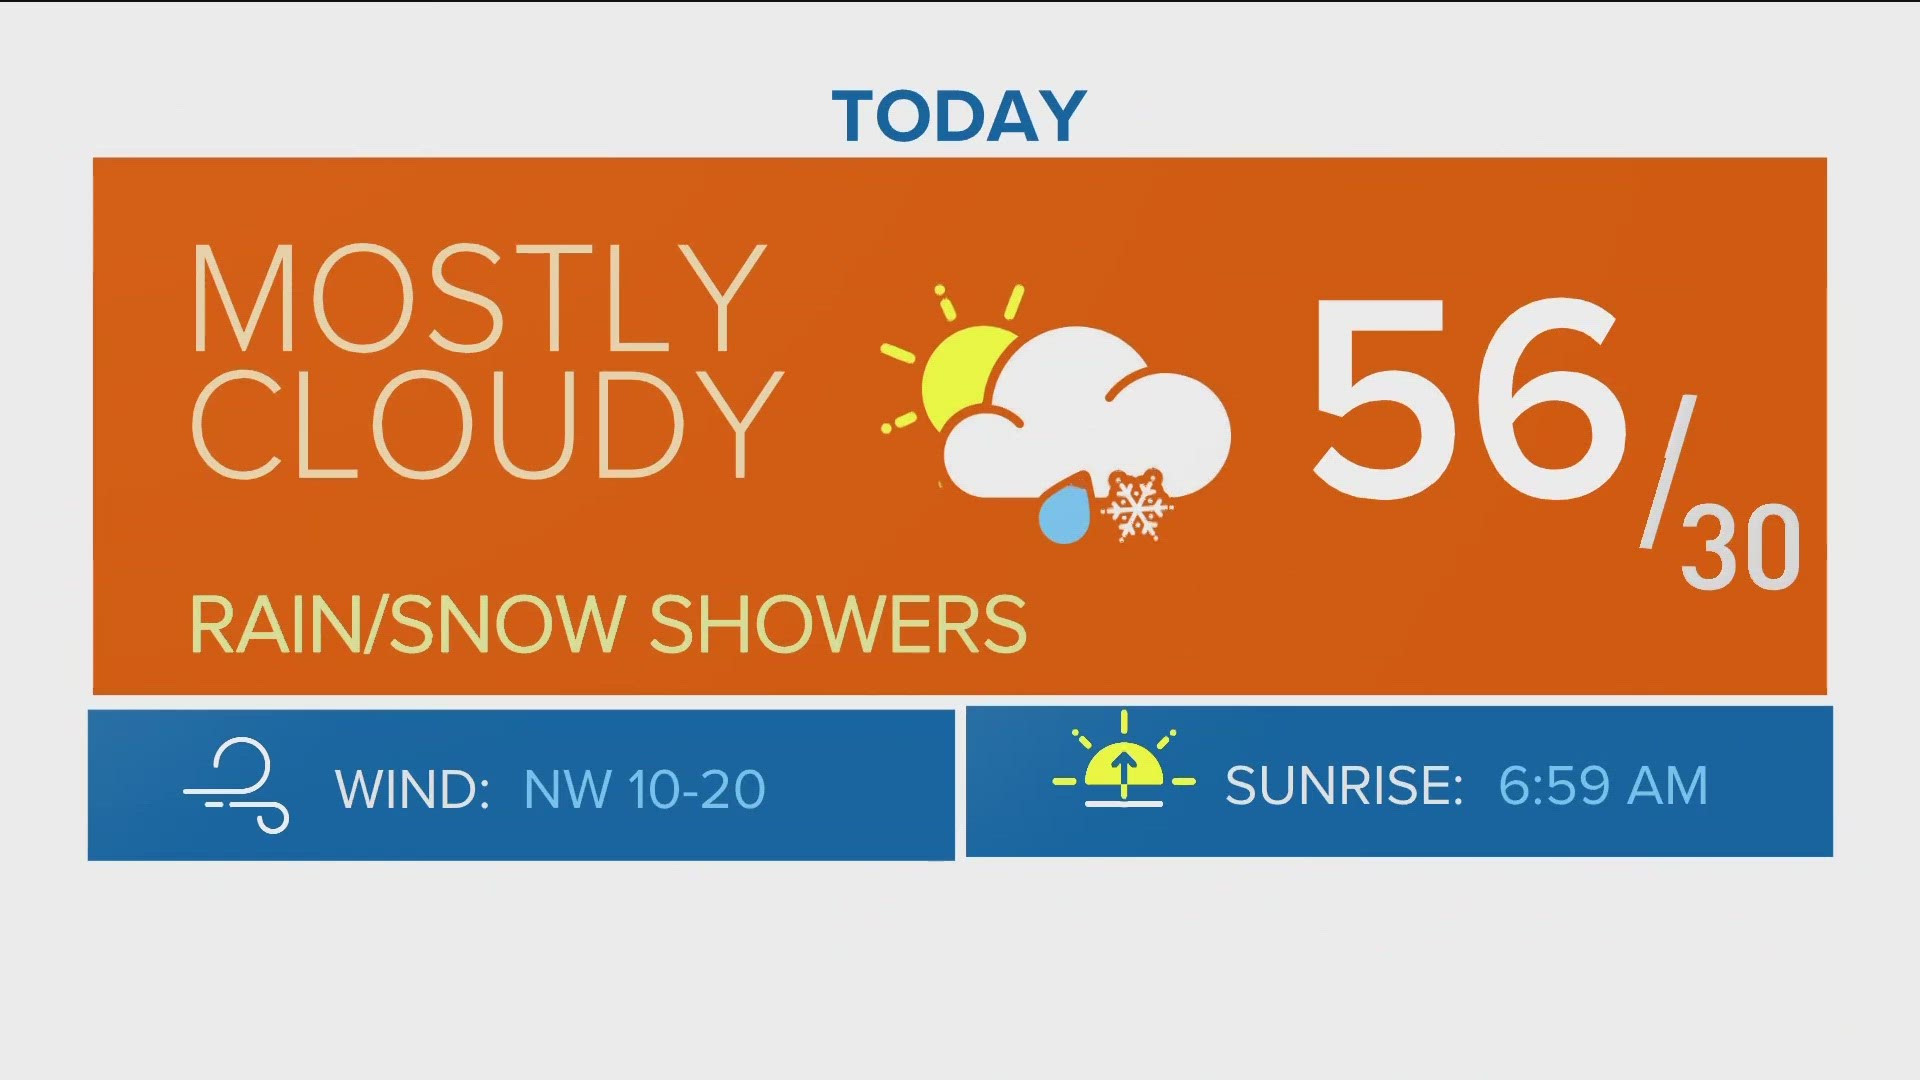 Denver will have a chance for rain or snow showers today, then a one-day break with partly cloudy skies tomorrow.